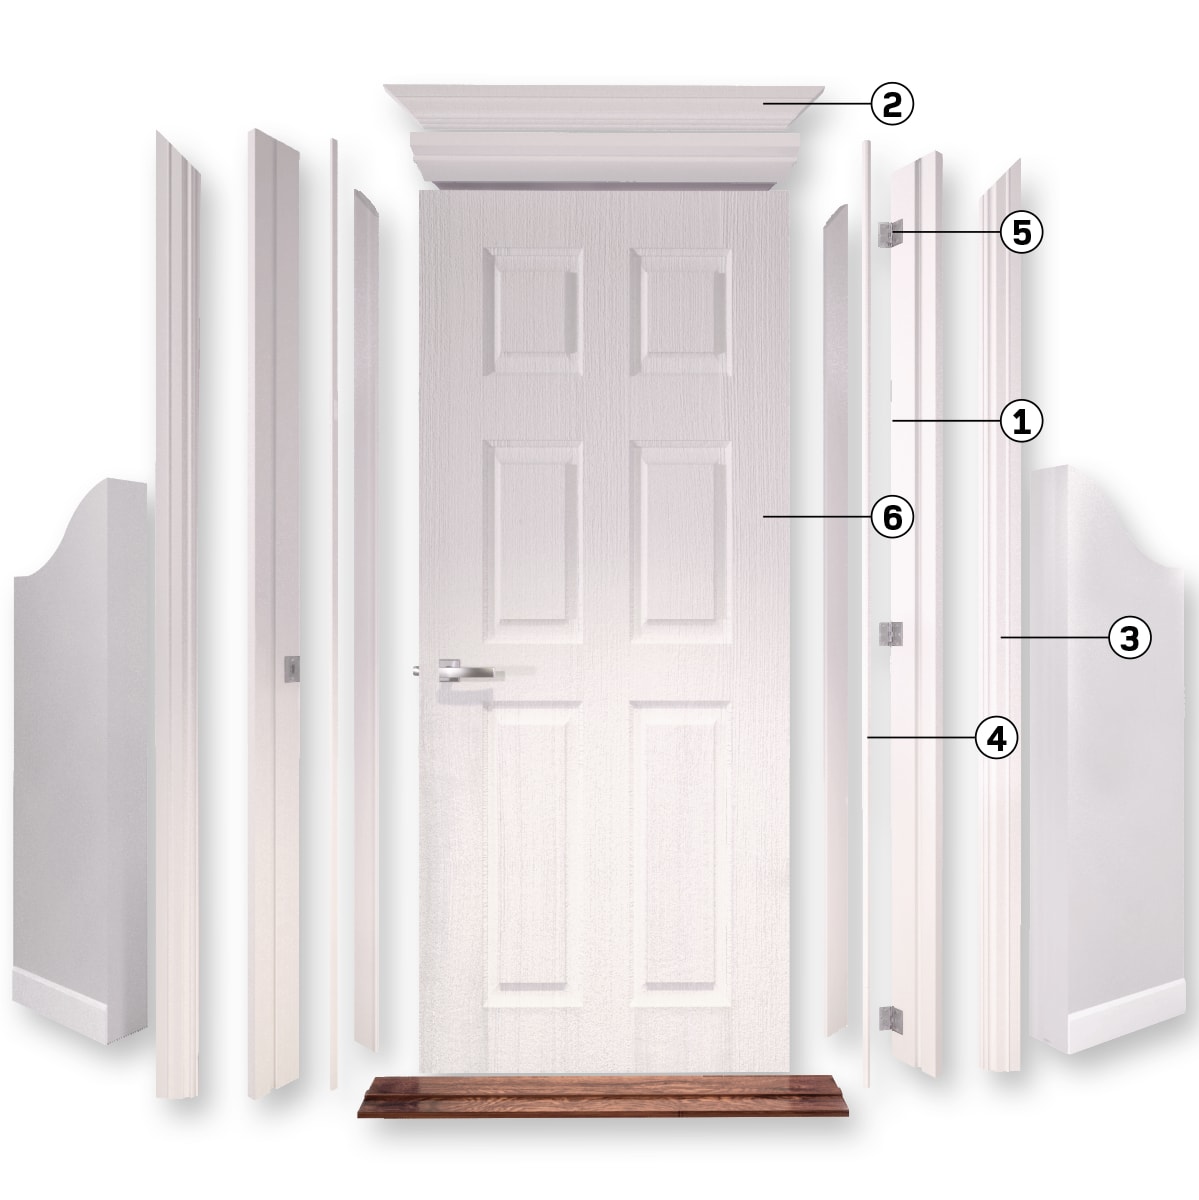 Drawing illustrating the components of an interior door